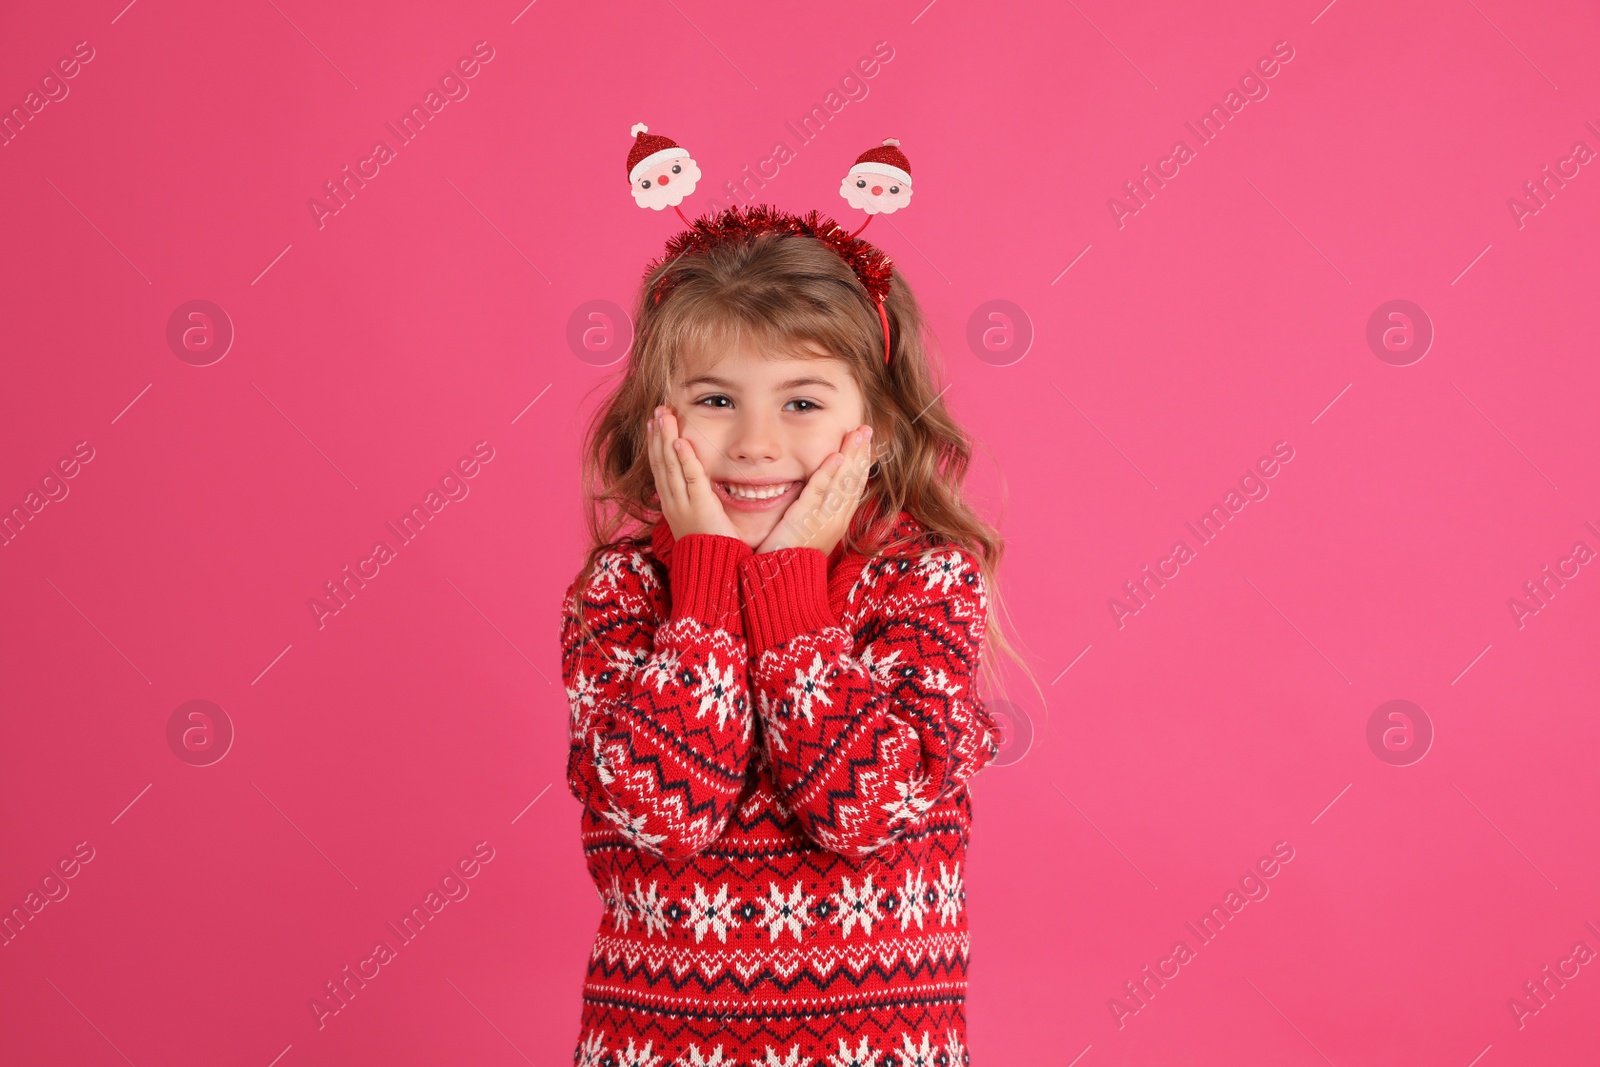 Photo of Cute little girl in red Christmas sweater smiling against pink background